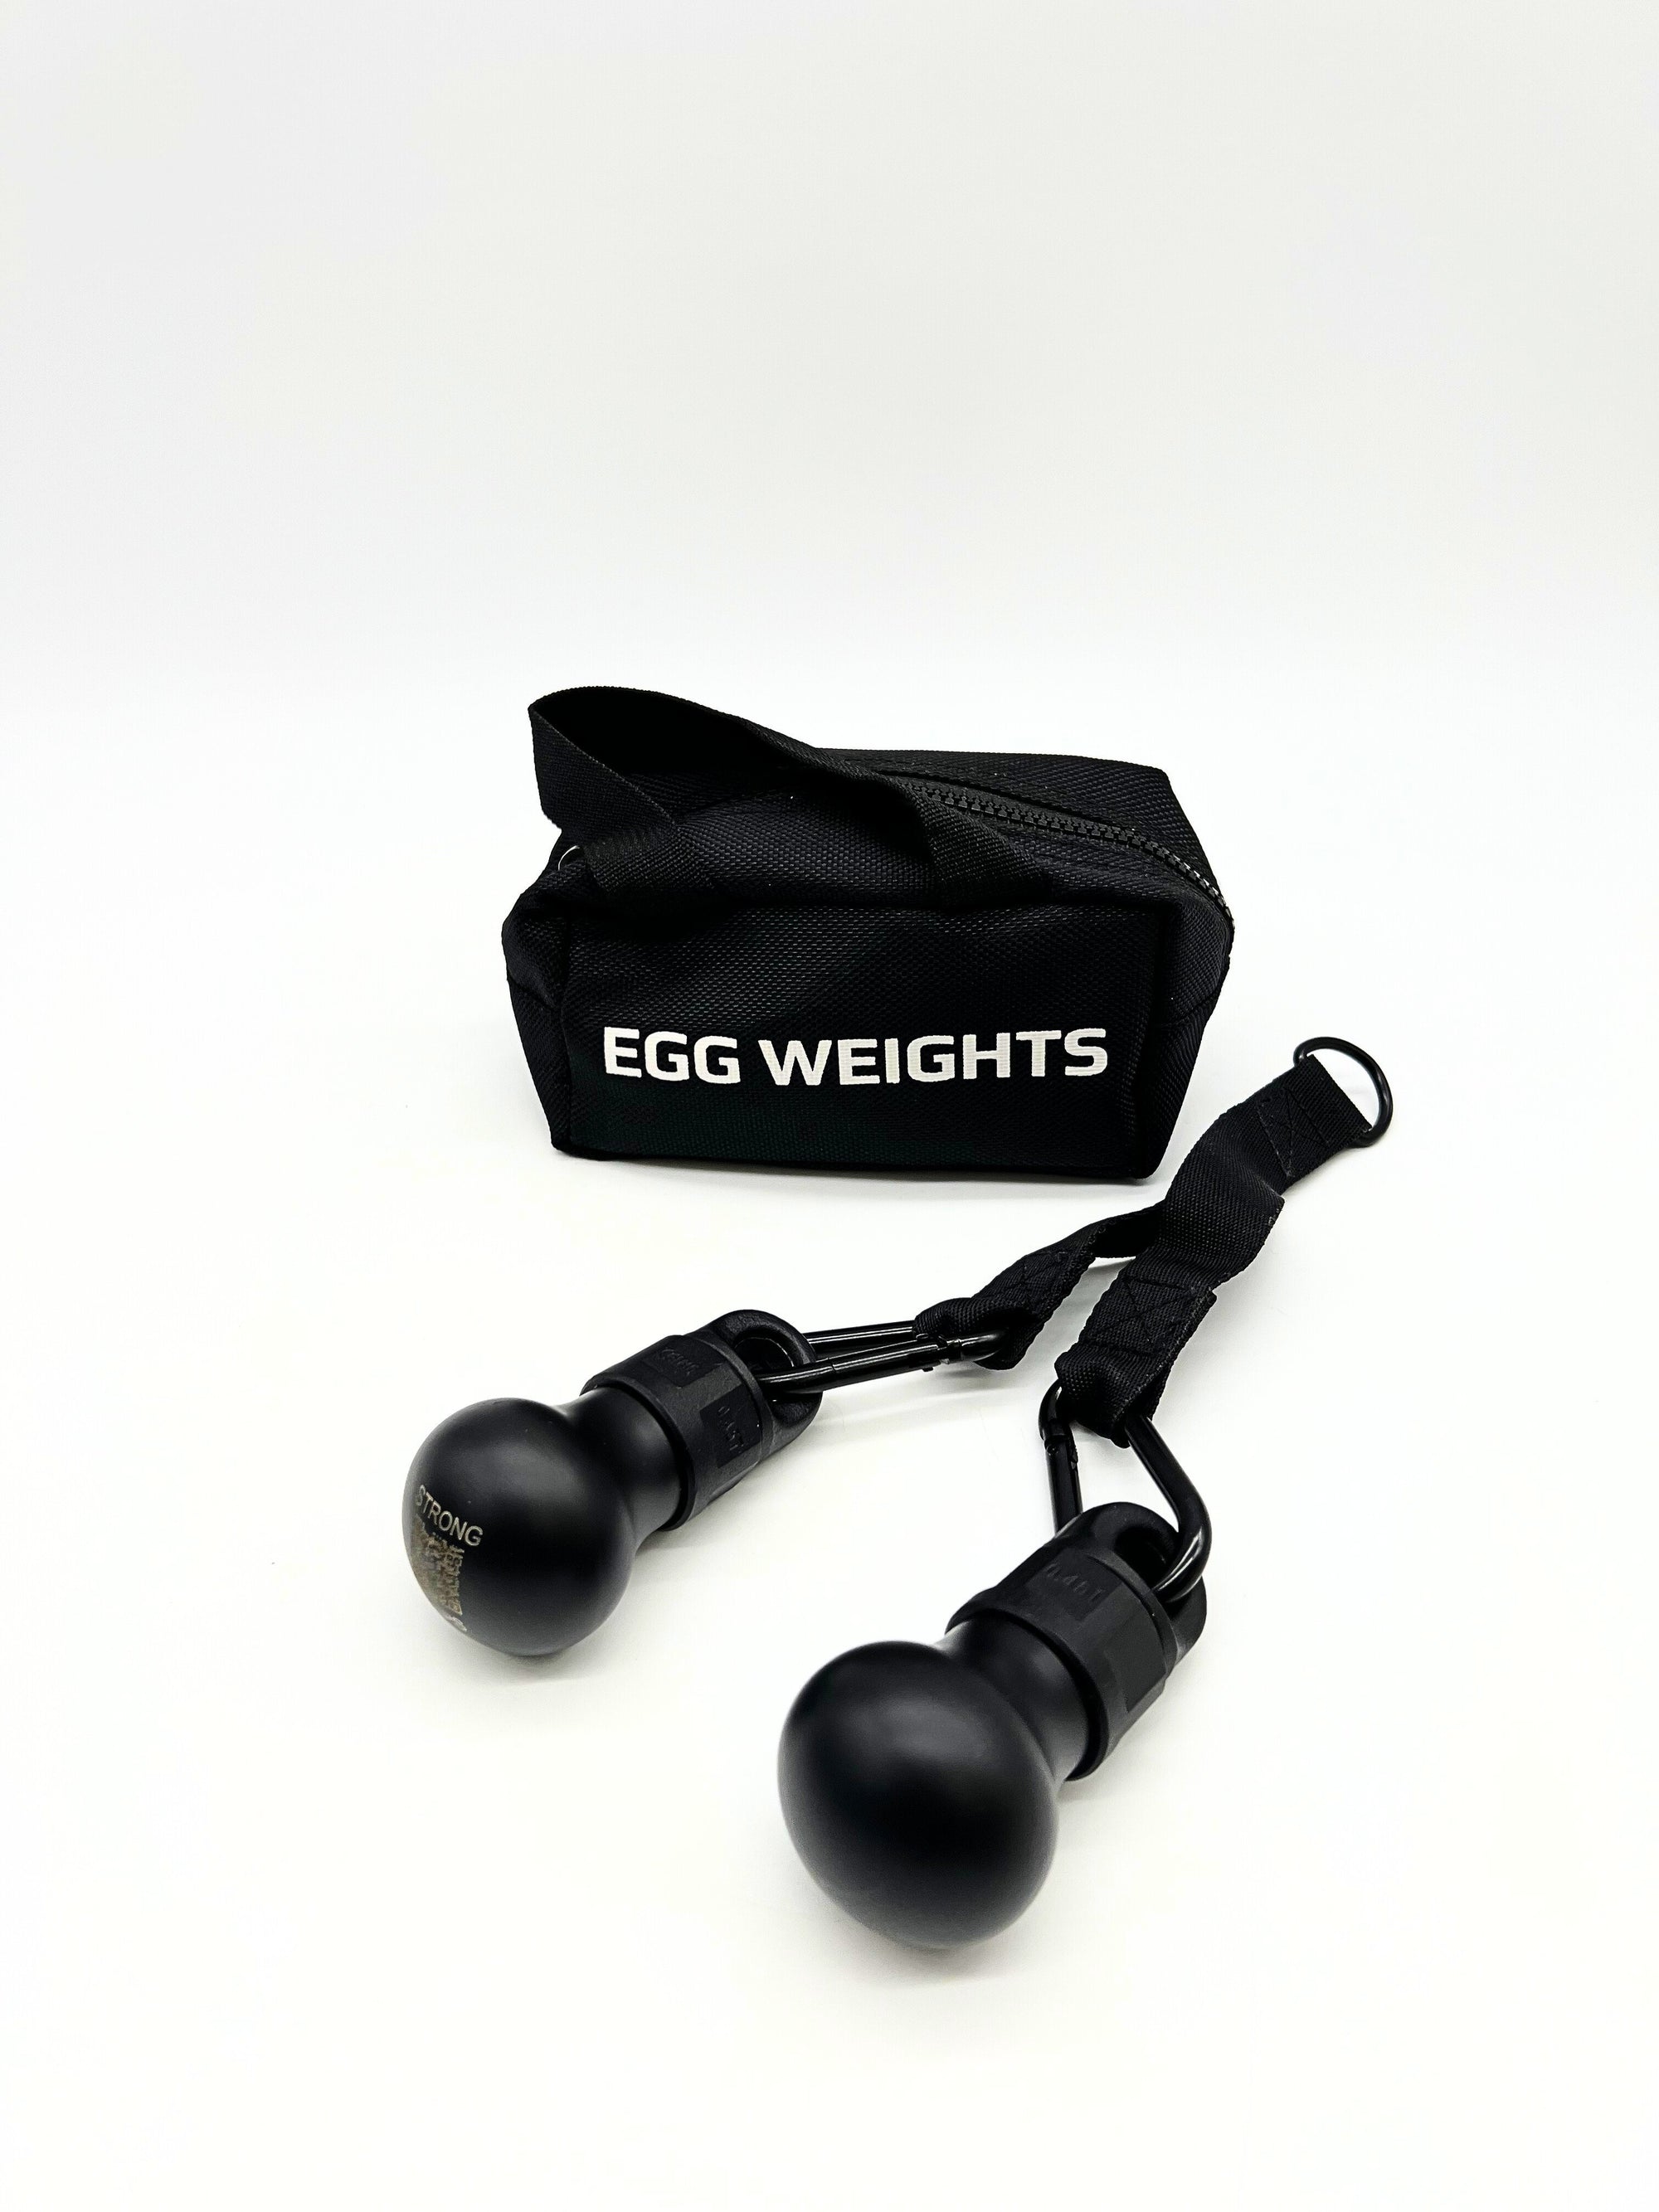 Strong Grip - Premium Rotating Cable Attachment Egg Weights